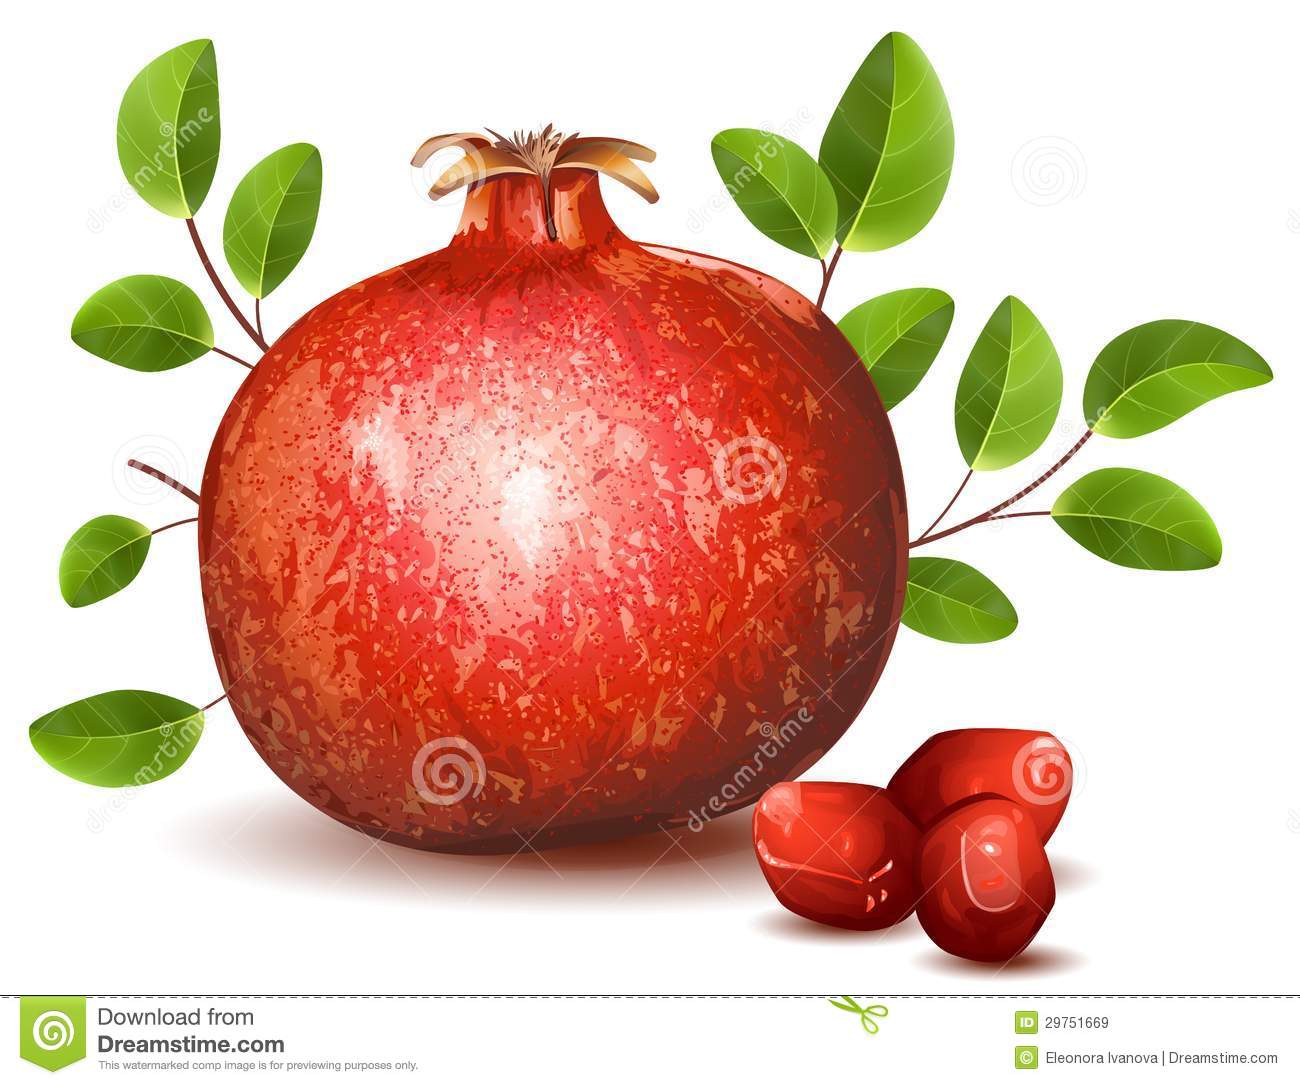 Pomegranate With Leaves Royalty Free Stock Images   Image  29751669